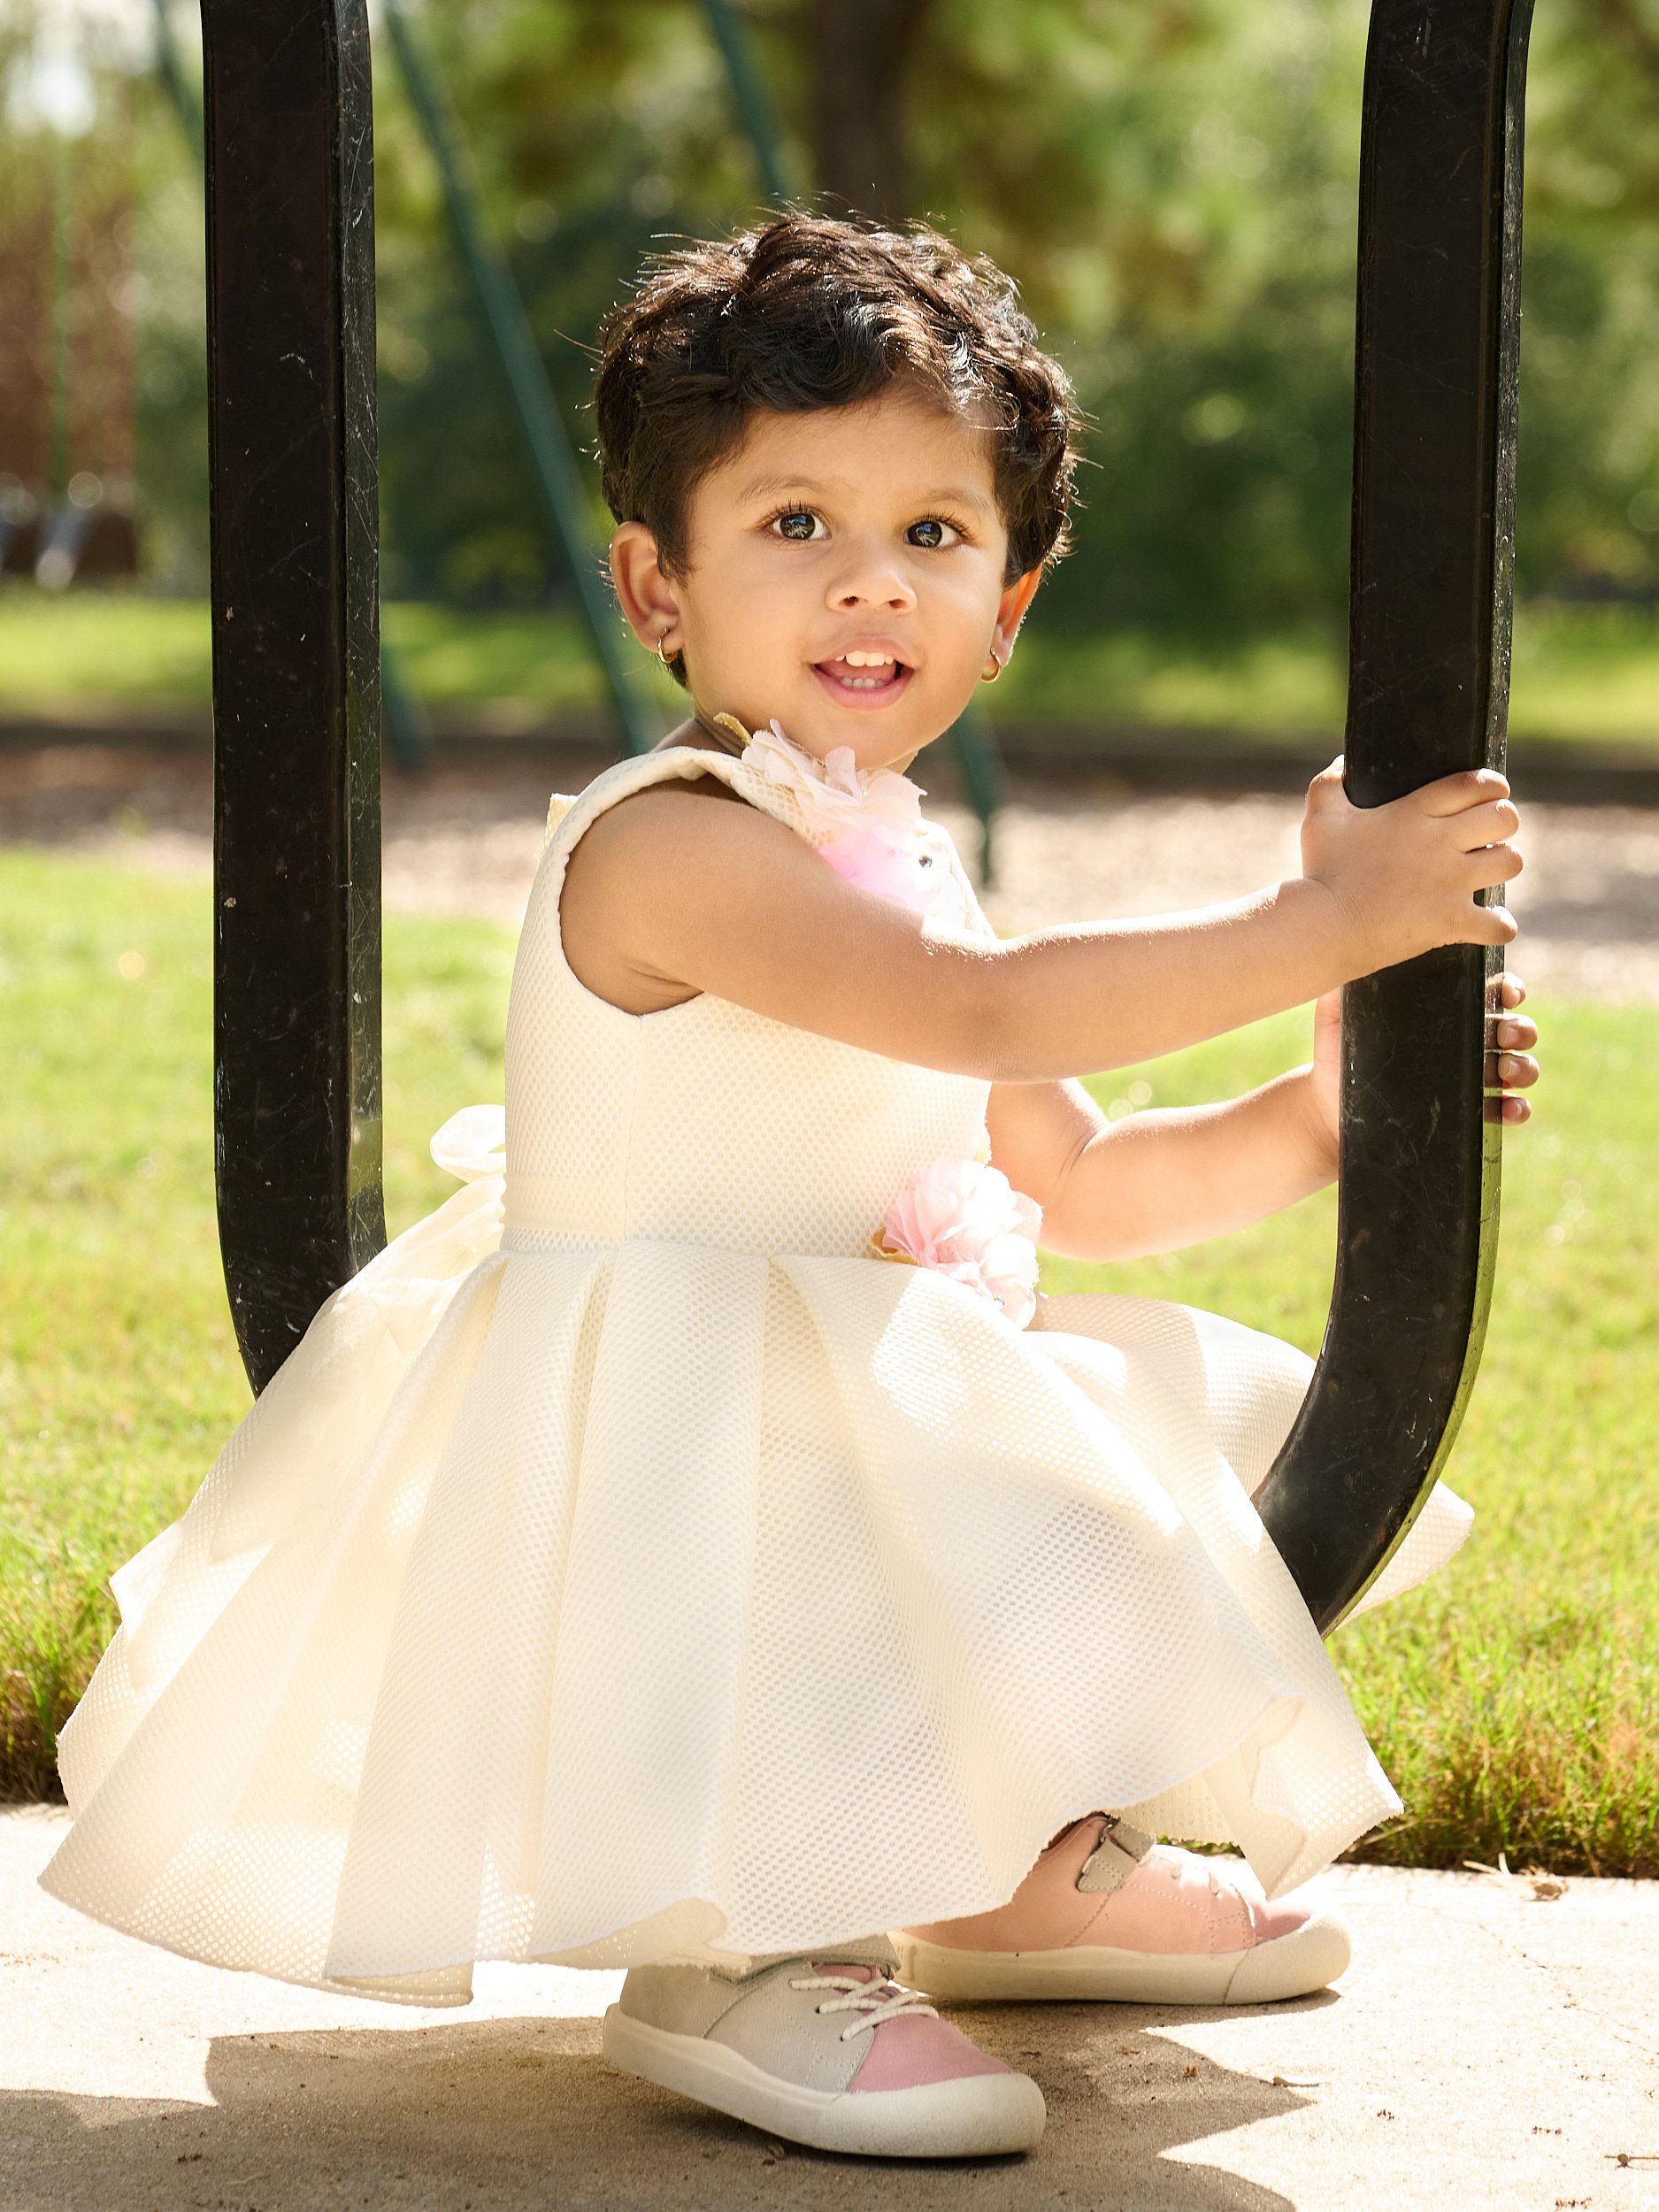  CYPRESS, TEXAS - SEPTEMBER 17TH 2022: a photo session at Cypress Creek Lakes Park on a hot and sunny summer day. Ragini Deore is posing for their annual family portraits for Christmas cards & wall art 